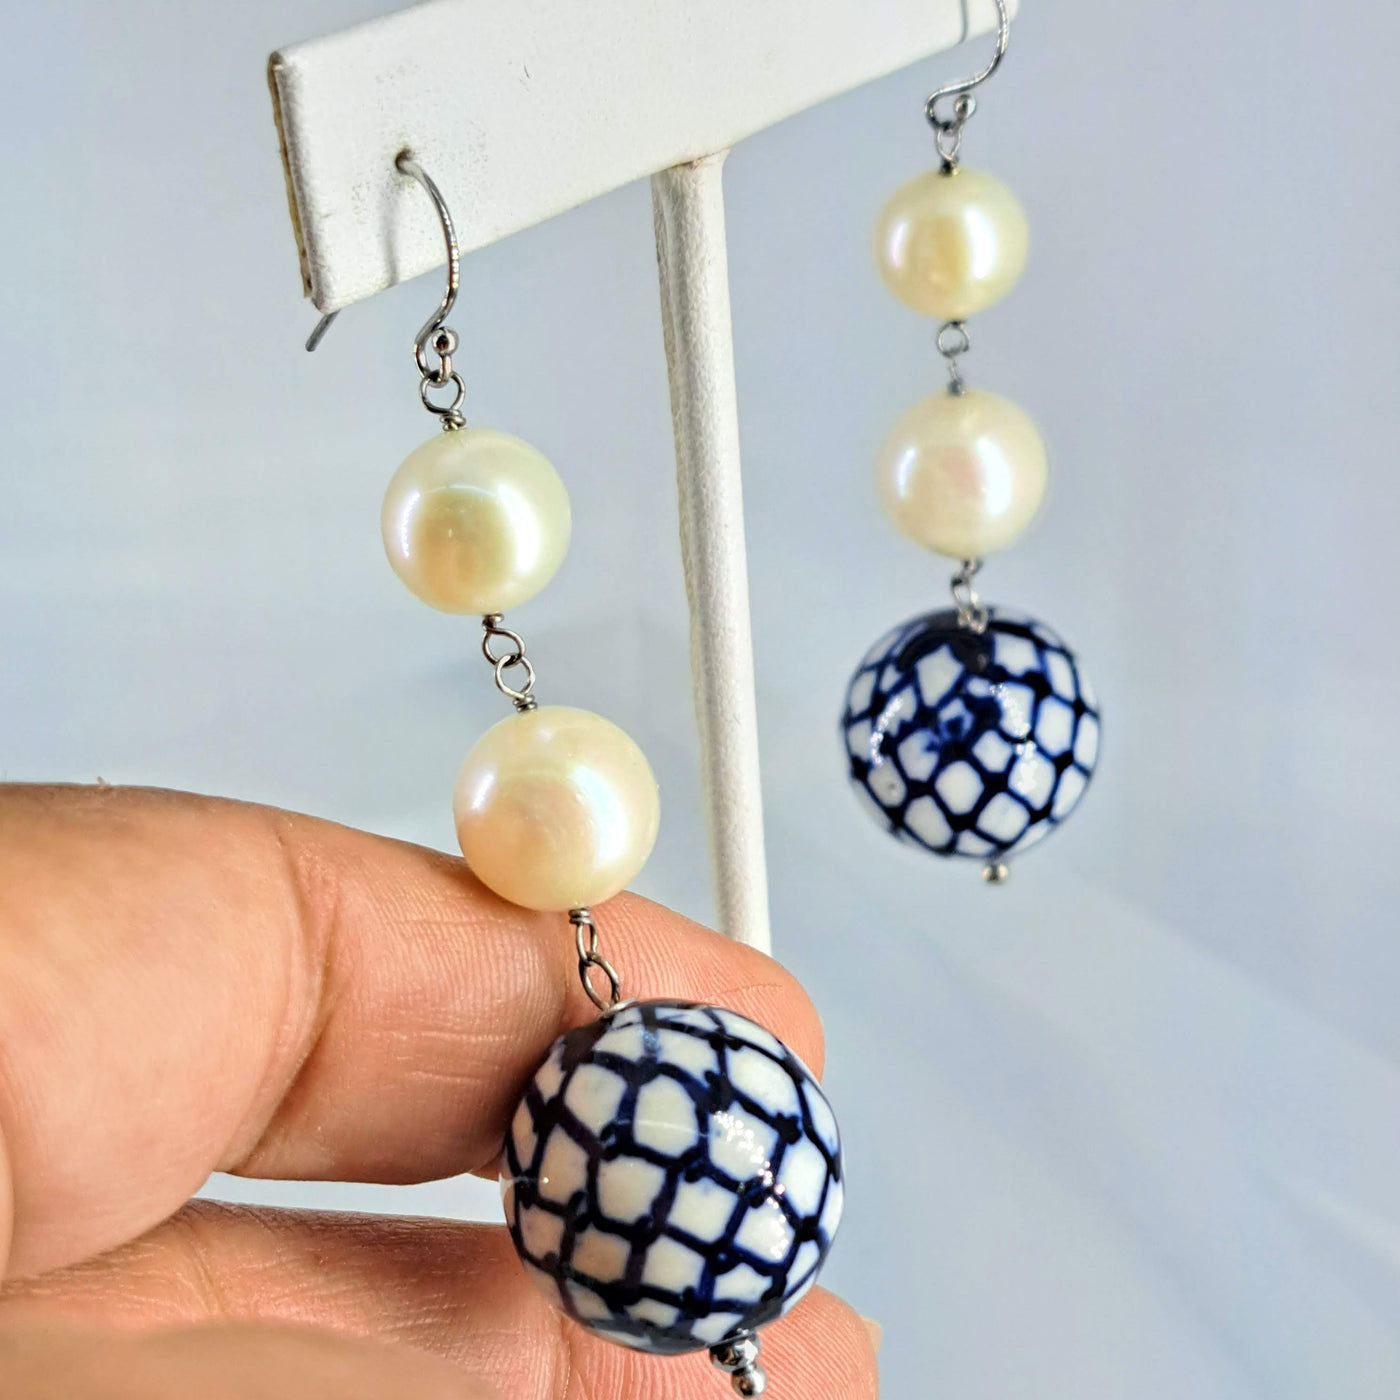 "Blue China" 2.75" Earrings - Pearls, Porcelain, Sterling